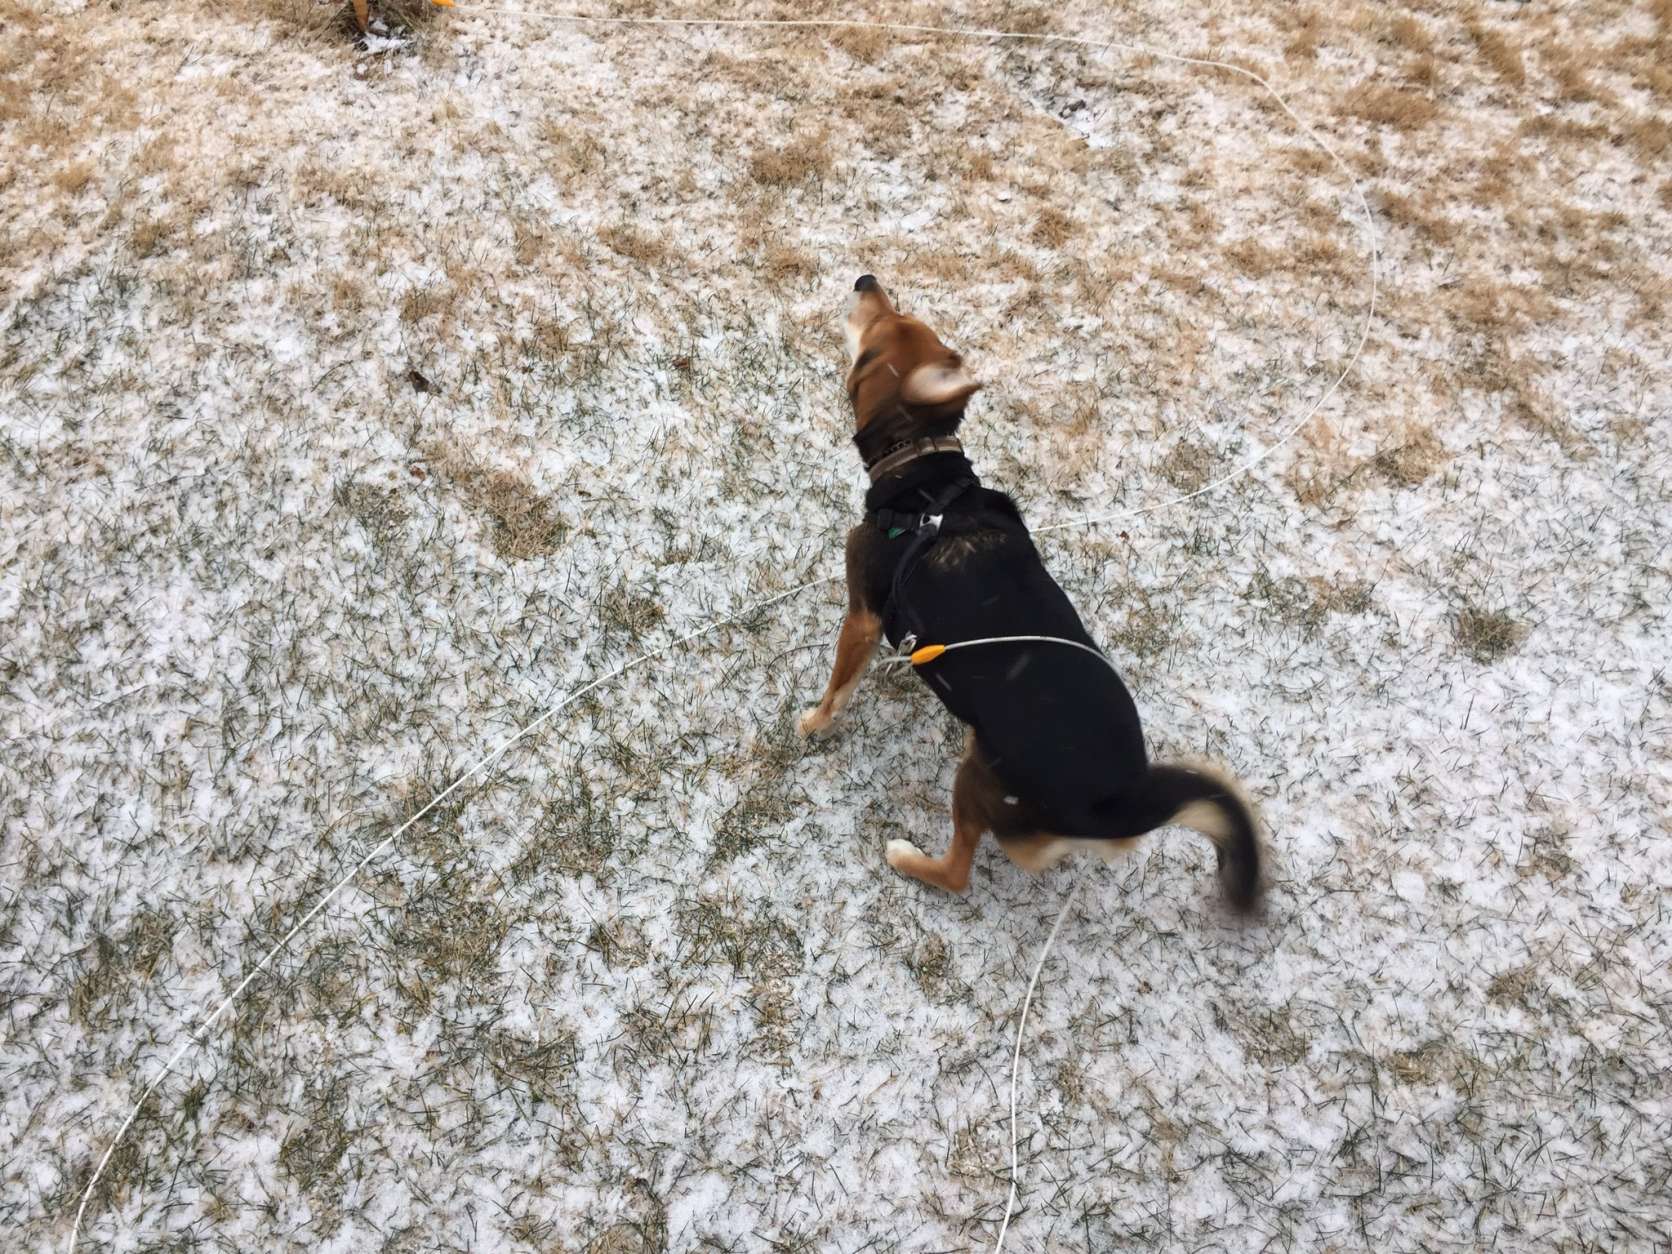 A dog gives a shake in light snow falling Saturday morning in Charles County, Md. (WTOP/Darci Marchese)